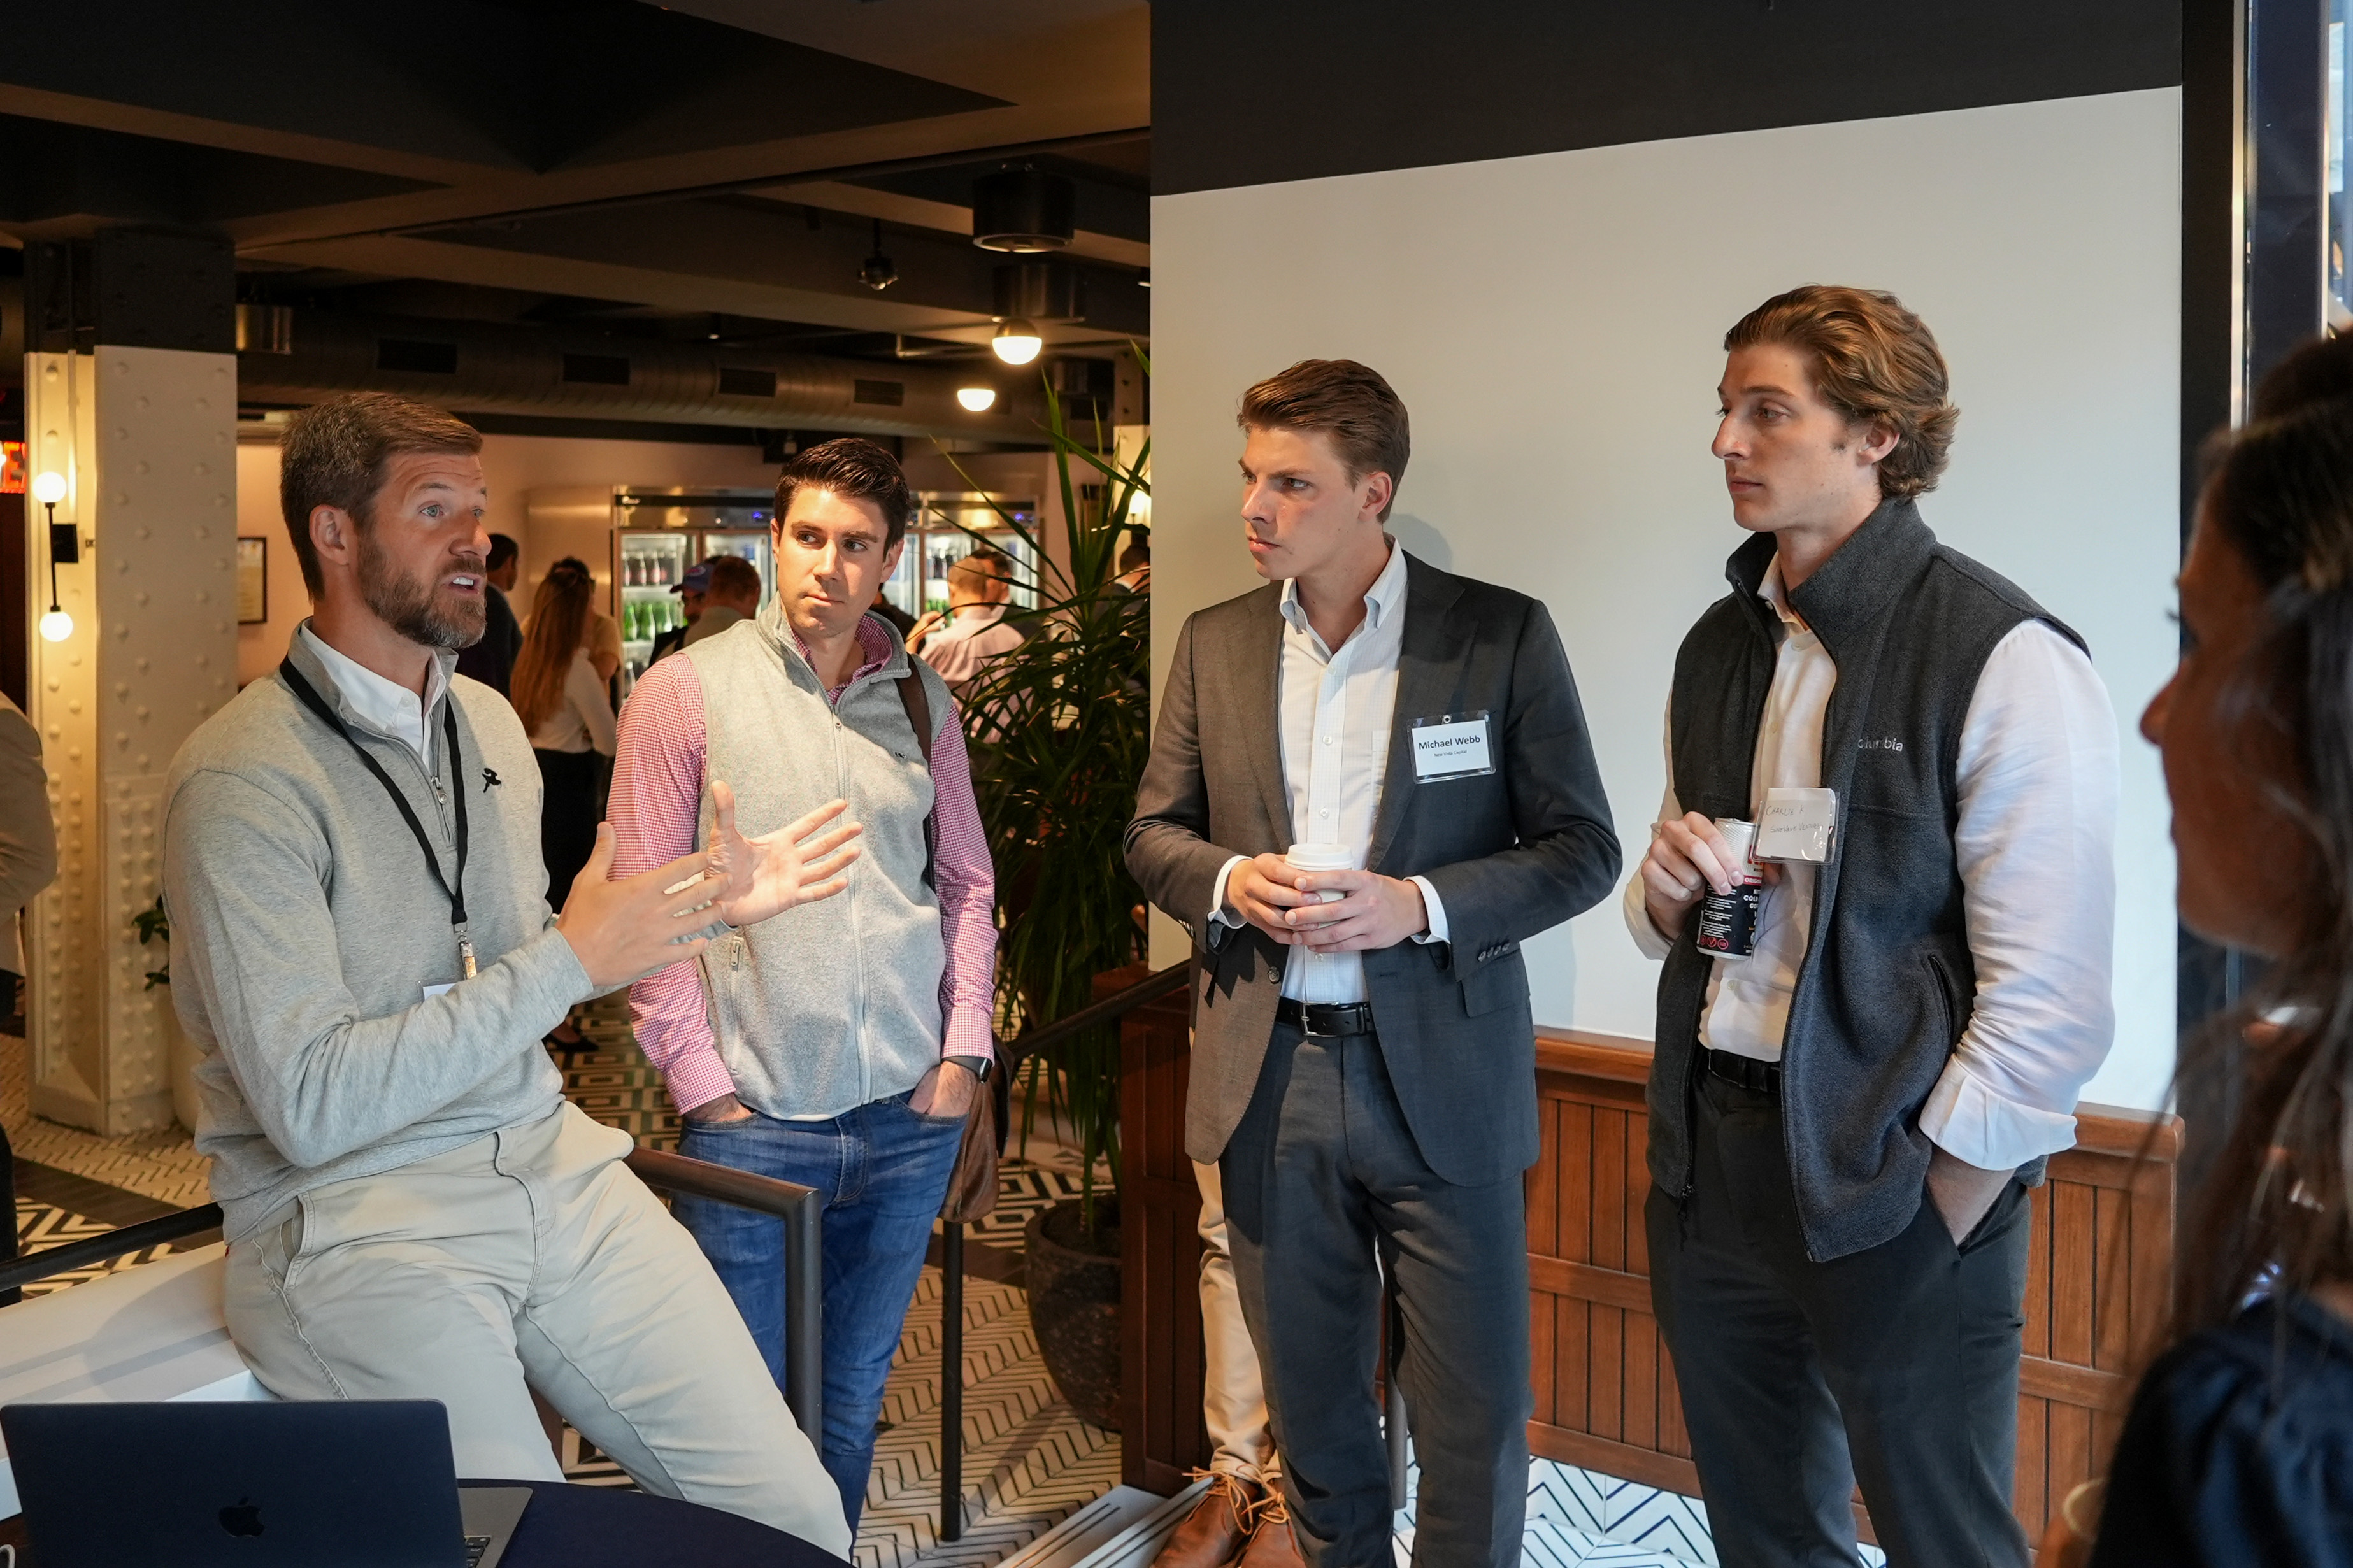 Benjamin Haynes (far left), CEO of Directus, discussed his team’s innovation with stakeholders.